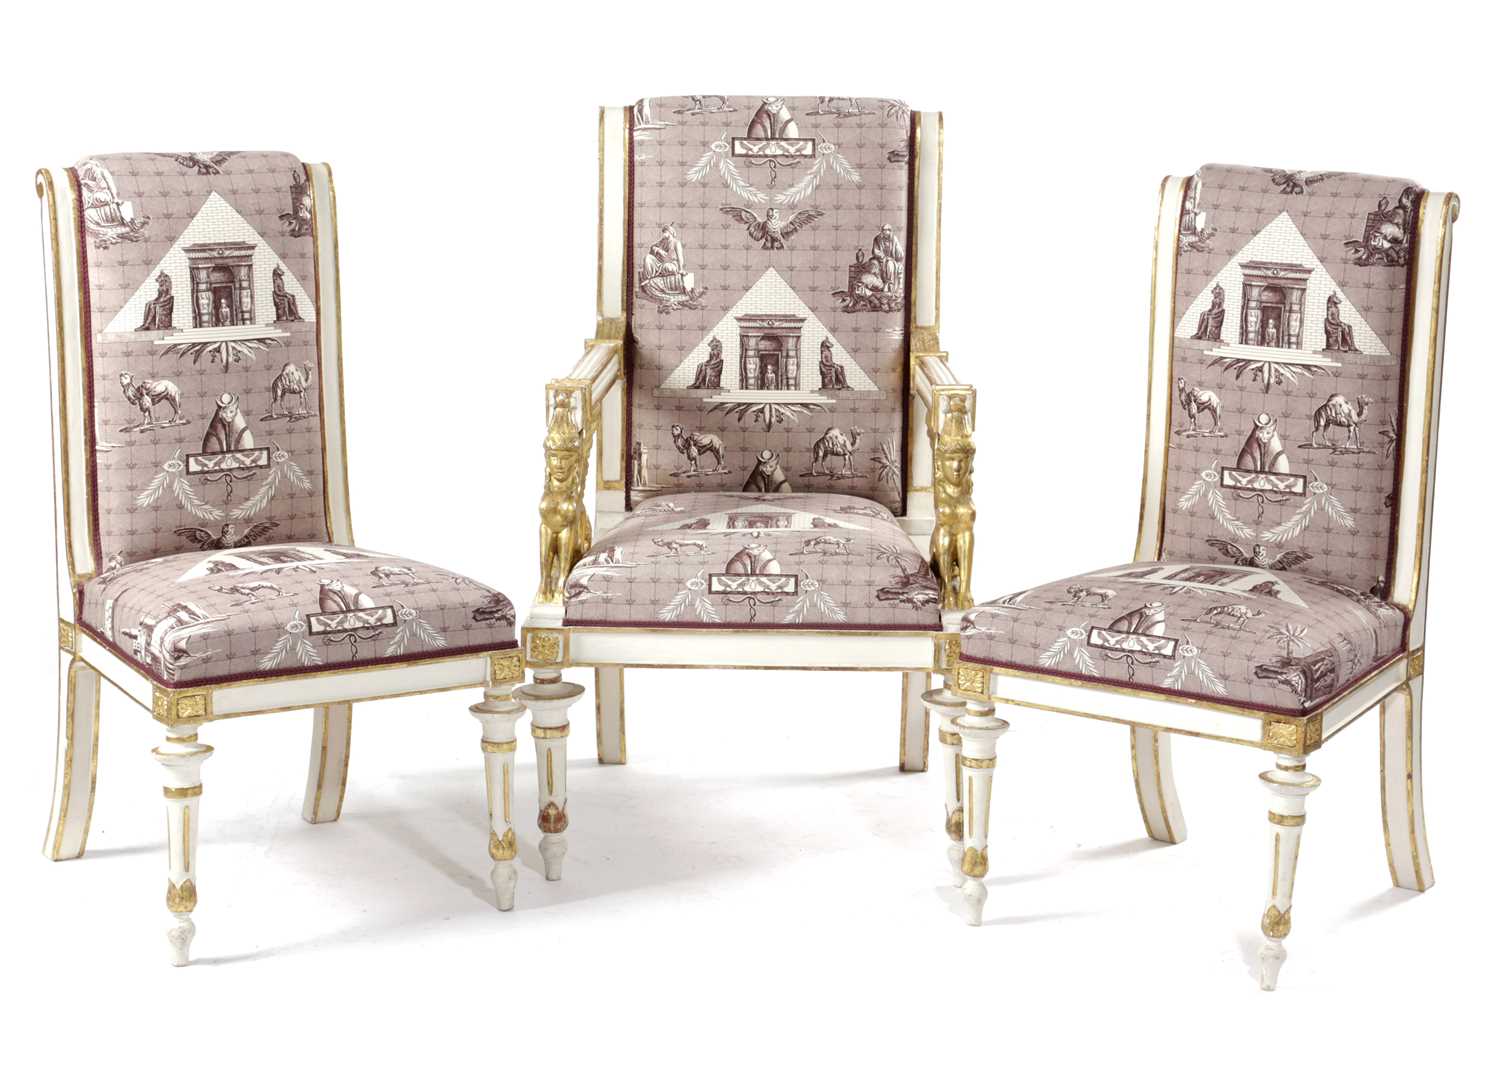 AN ITALIAN PAINTED AND PARCEL GILT SALON SUITE IN EGYPTIAN REVIVAL STYLE, LATE 19TH / EARLY 20TH - Image 2 of 4